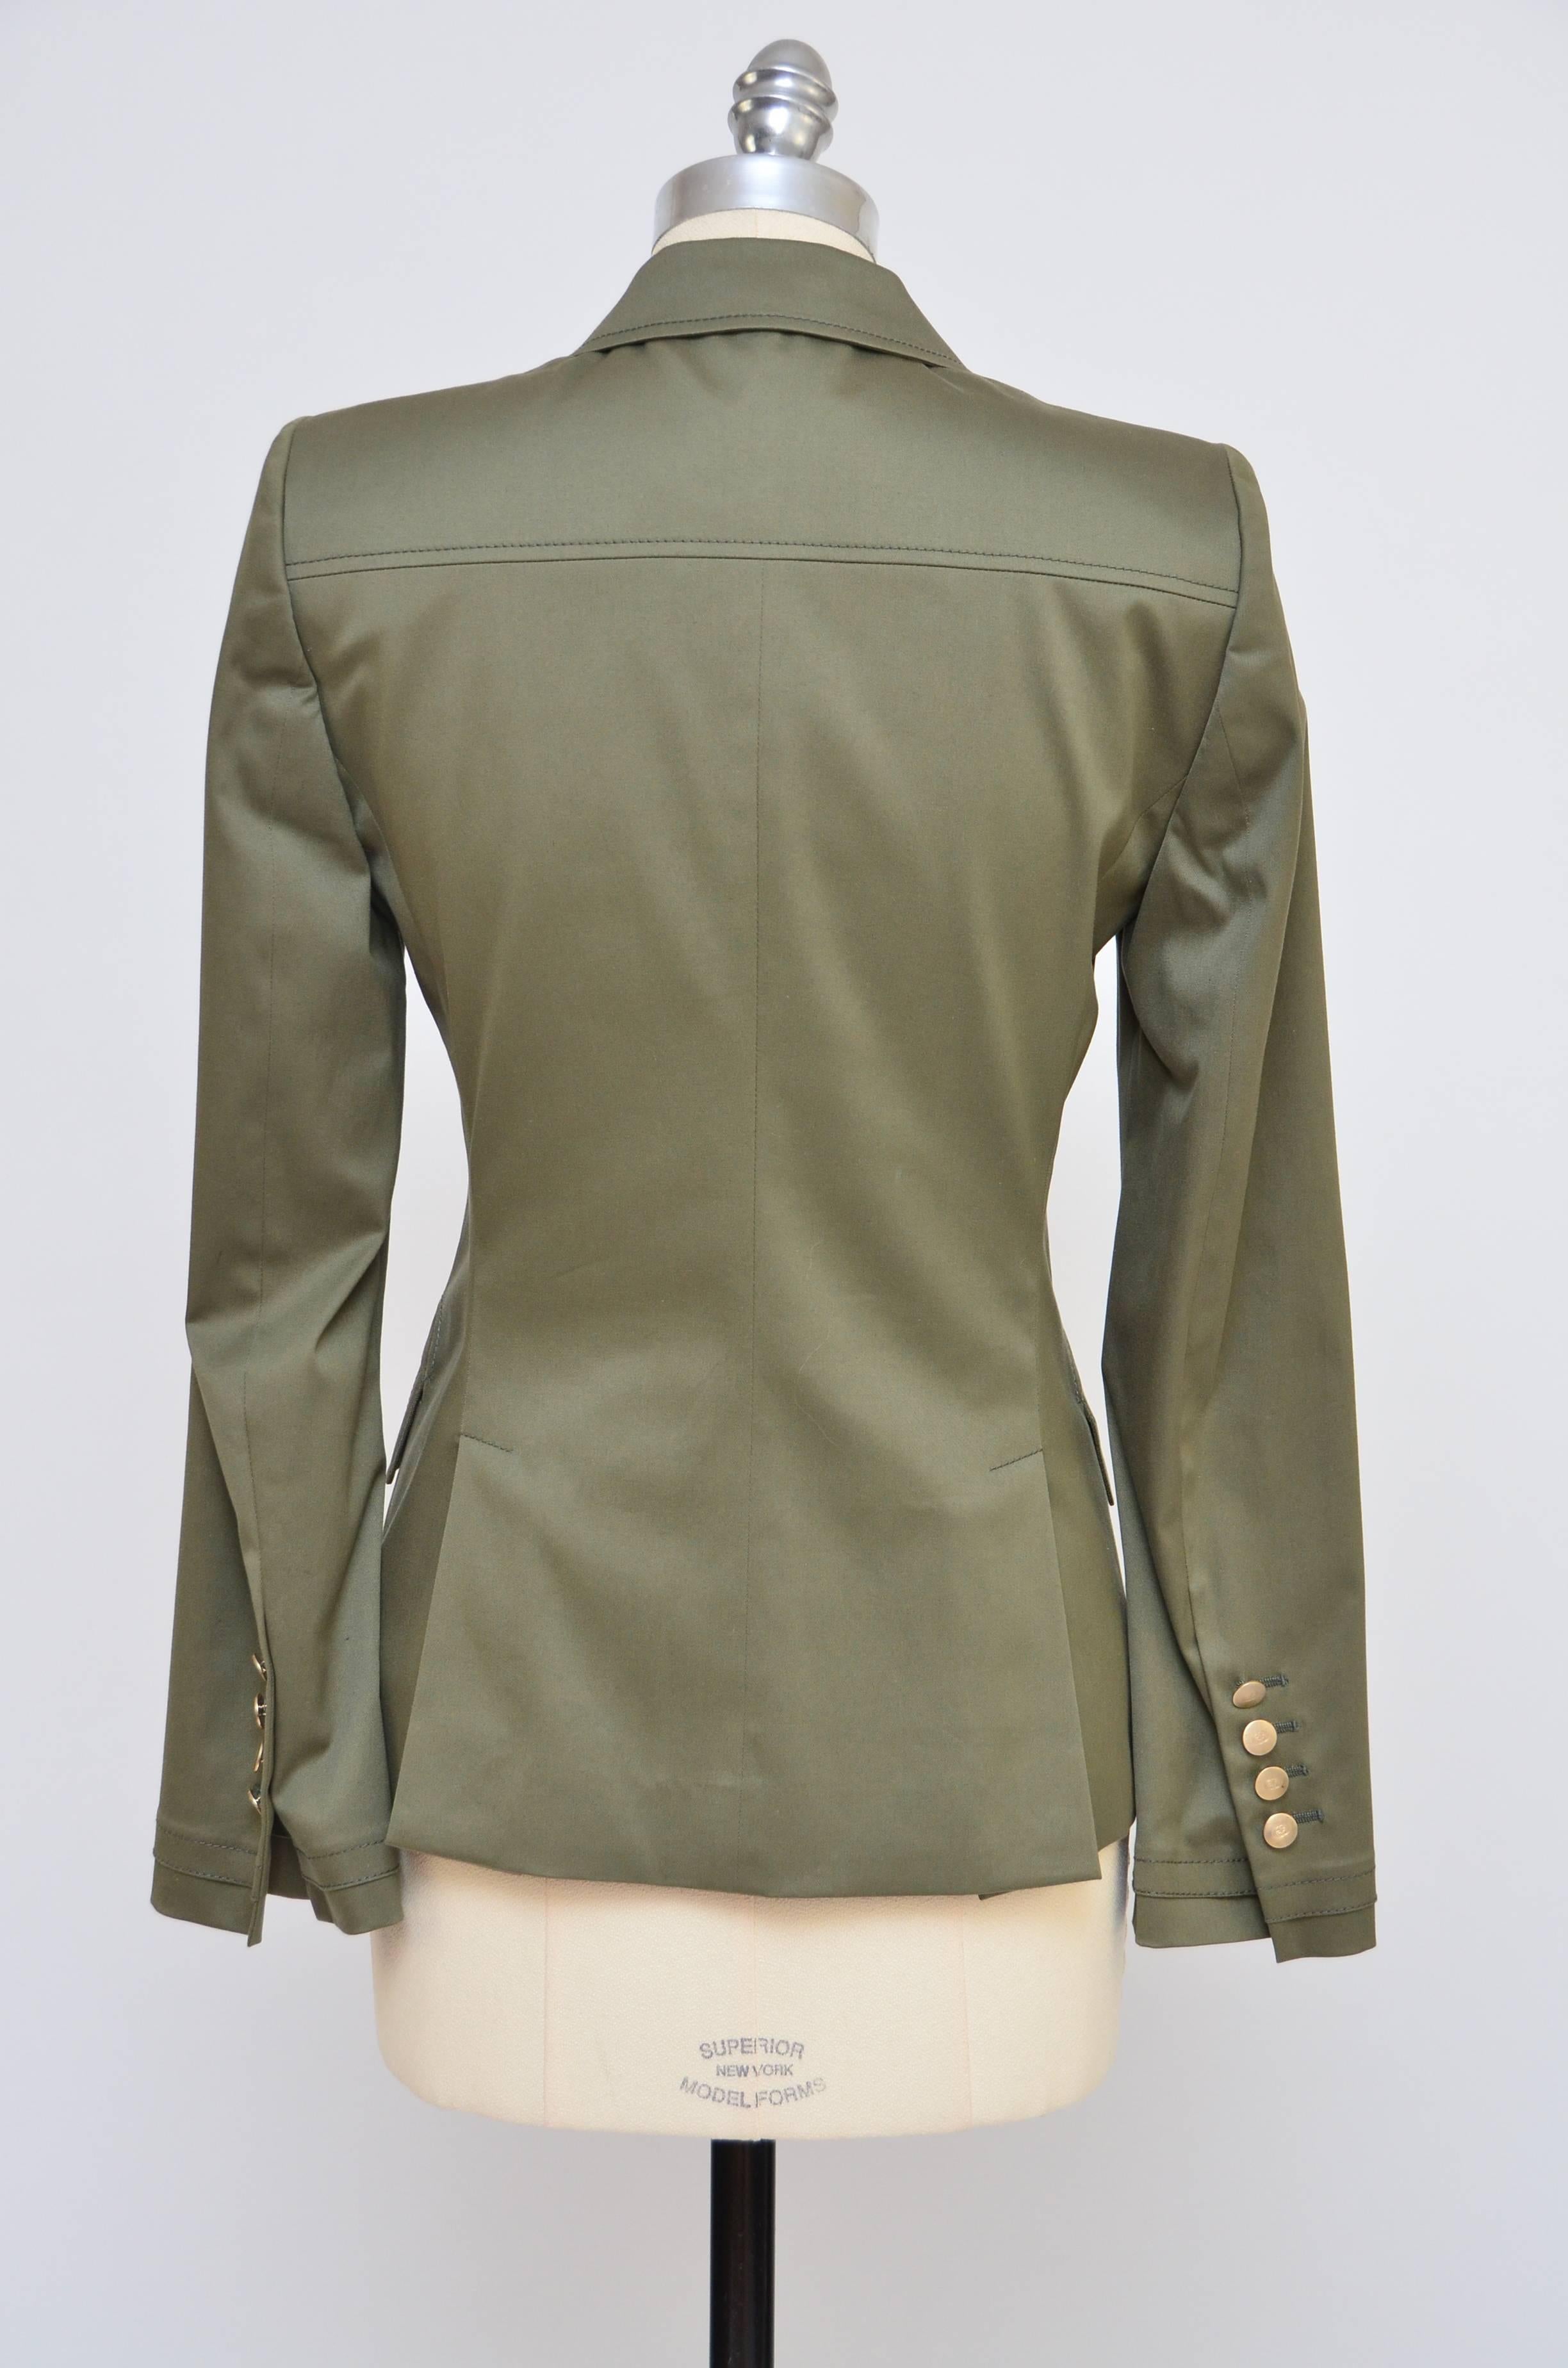 Gucci army green blazer in mint condition possibly never worn.
Size 40.
Made in Italy.
Approximate measure:Waist 30